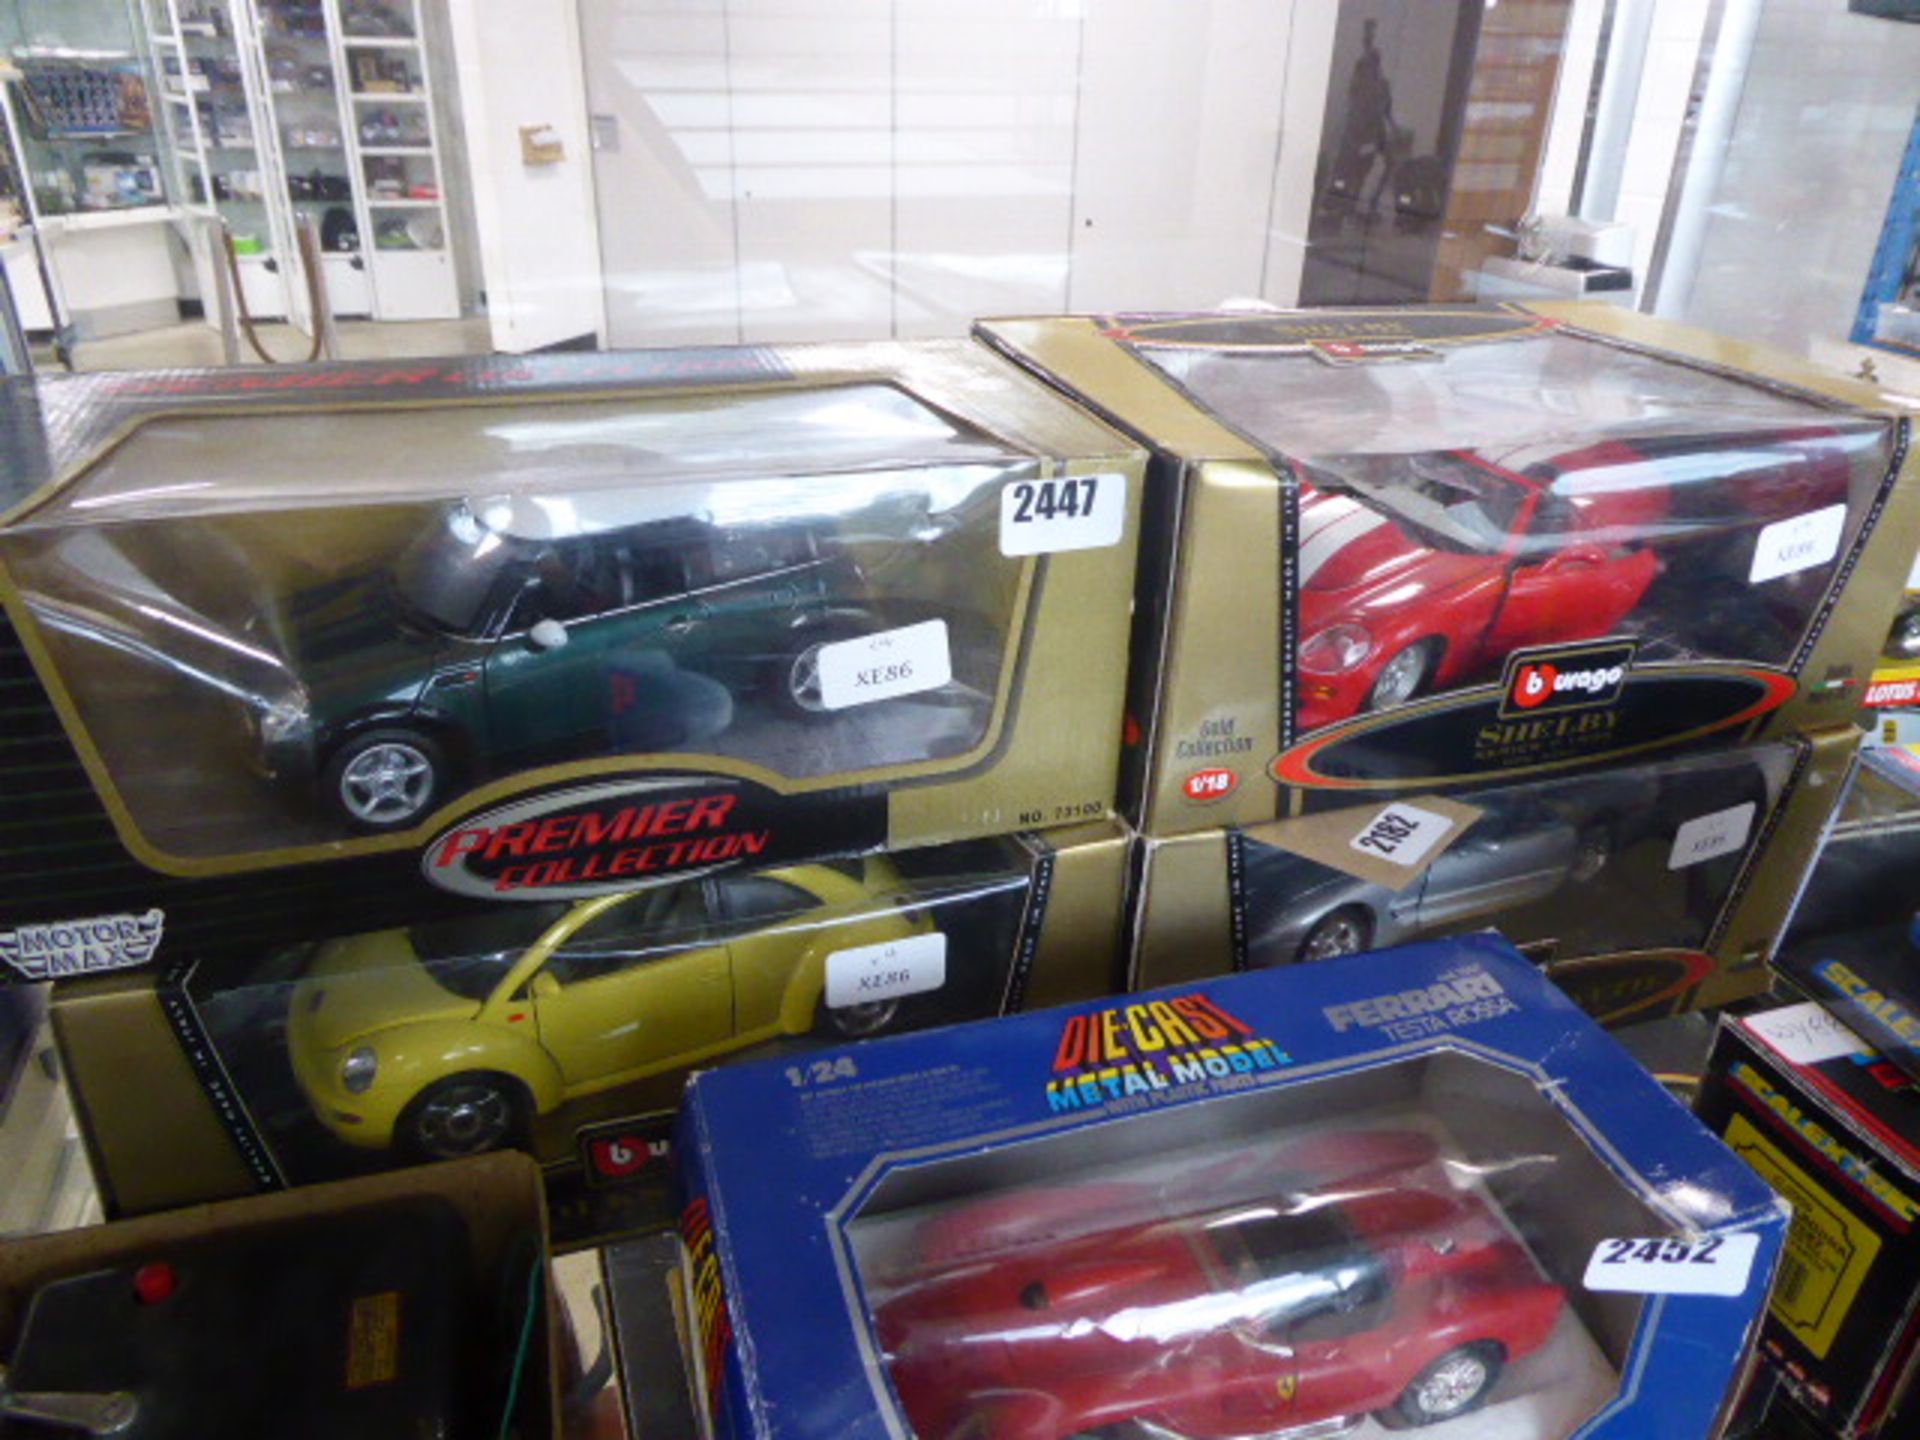 2182 4 x 1:18 scale collectable vehicles in cases including the Shelby Series One, Cheverlot